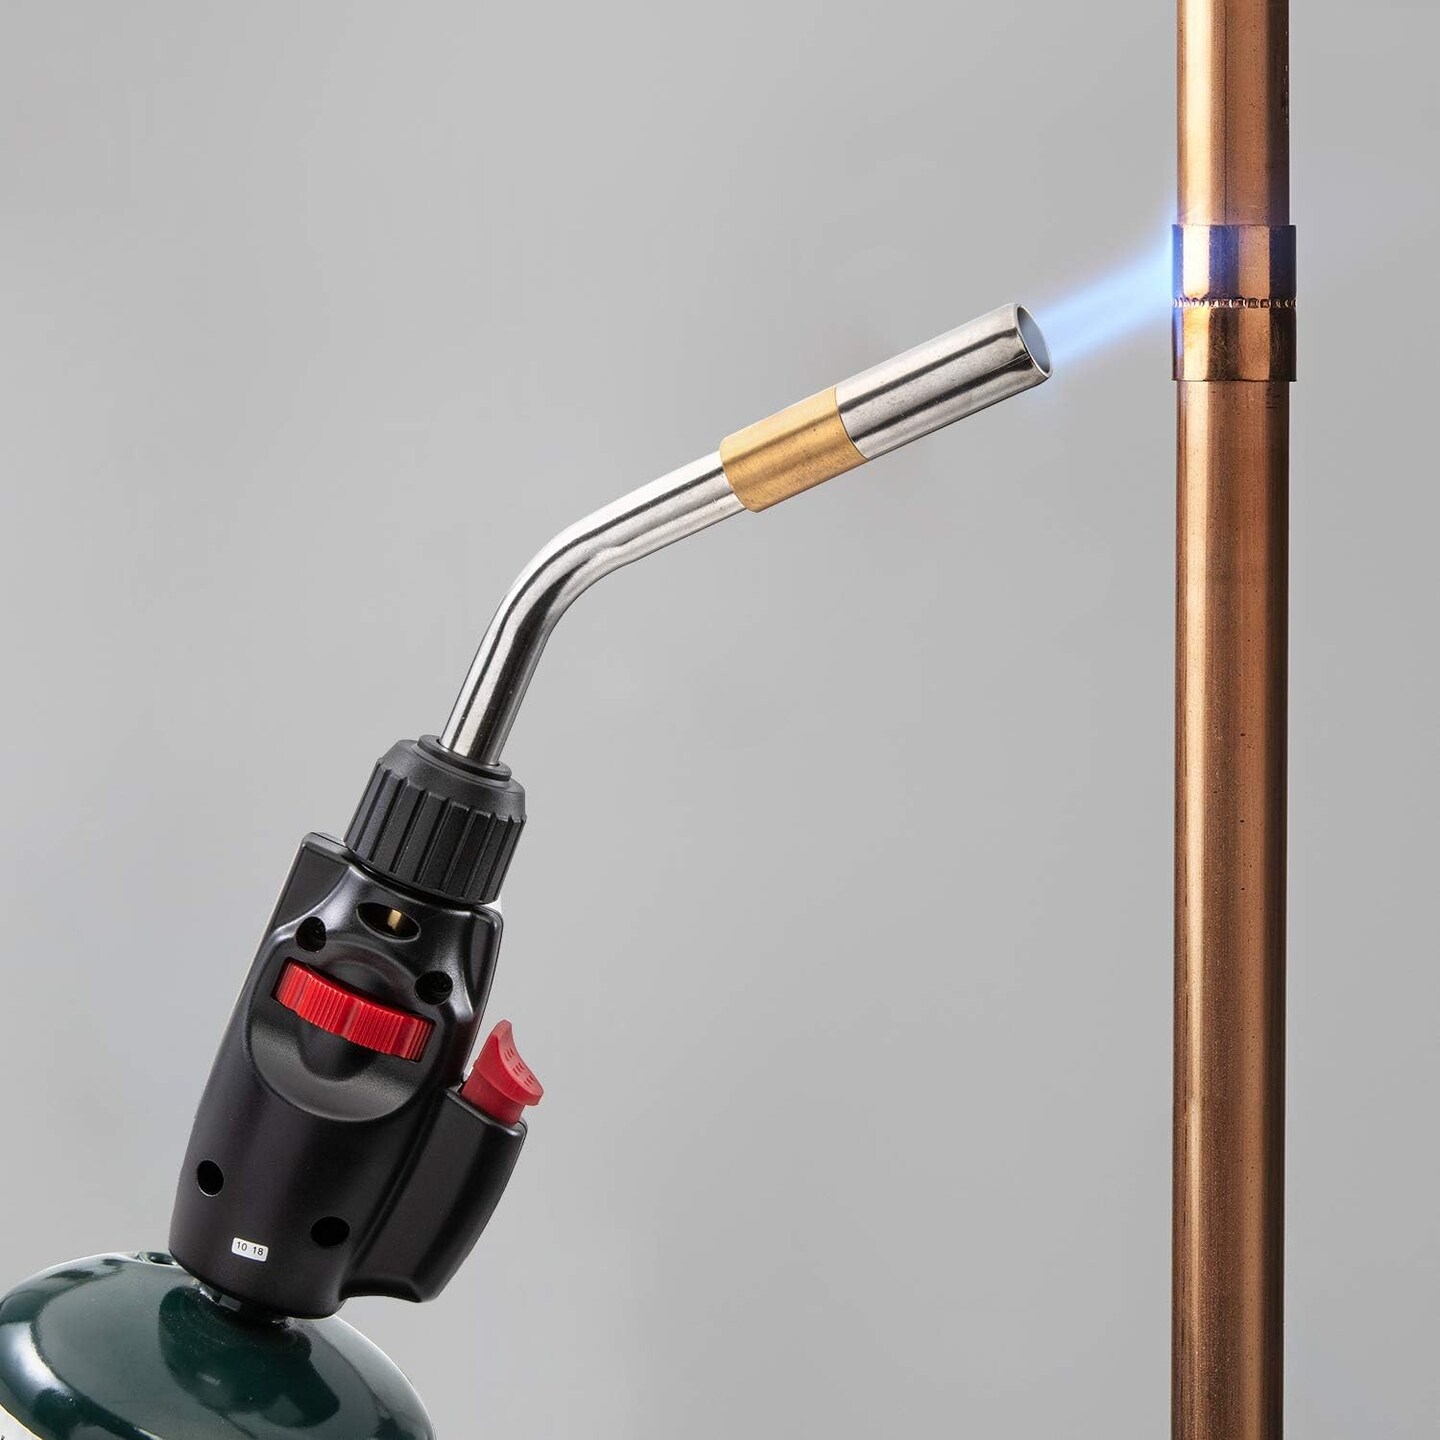 Ivation Propane Torch, Torch Lighter with Trigger Ignition and Adjustable Flame